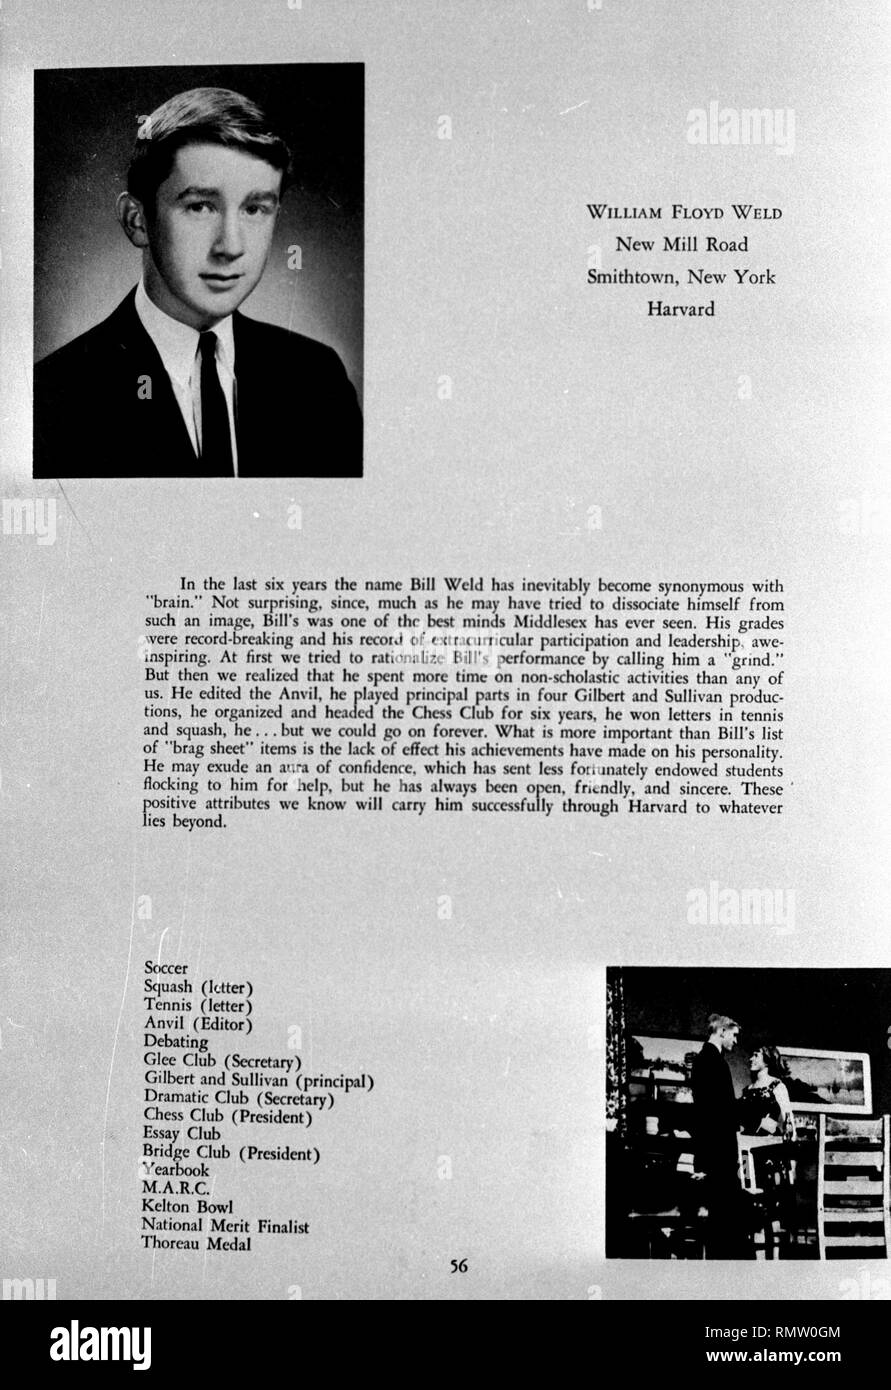 Former Massachusetts Governor Bill Weld announced he will run against President Donald Trump for the Republican Presidential nomination in 2020. Copy photo of former Massachusettss Governor Bill Weld's High School yearbook  Boston Ma USA photo by bill Belknap 1995 (These images are scanned from my 1995 B&W negatives of then Massachusetts Governor Bill Weld family scrapbook. The Weld family allowed me to copy photo the family photo album. I do have other copy photos from the album. I was on staff at the Boston Herald,) Stock Photo